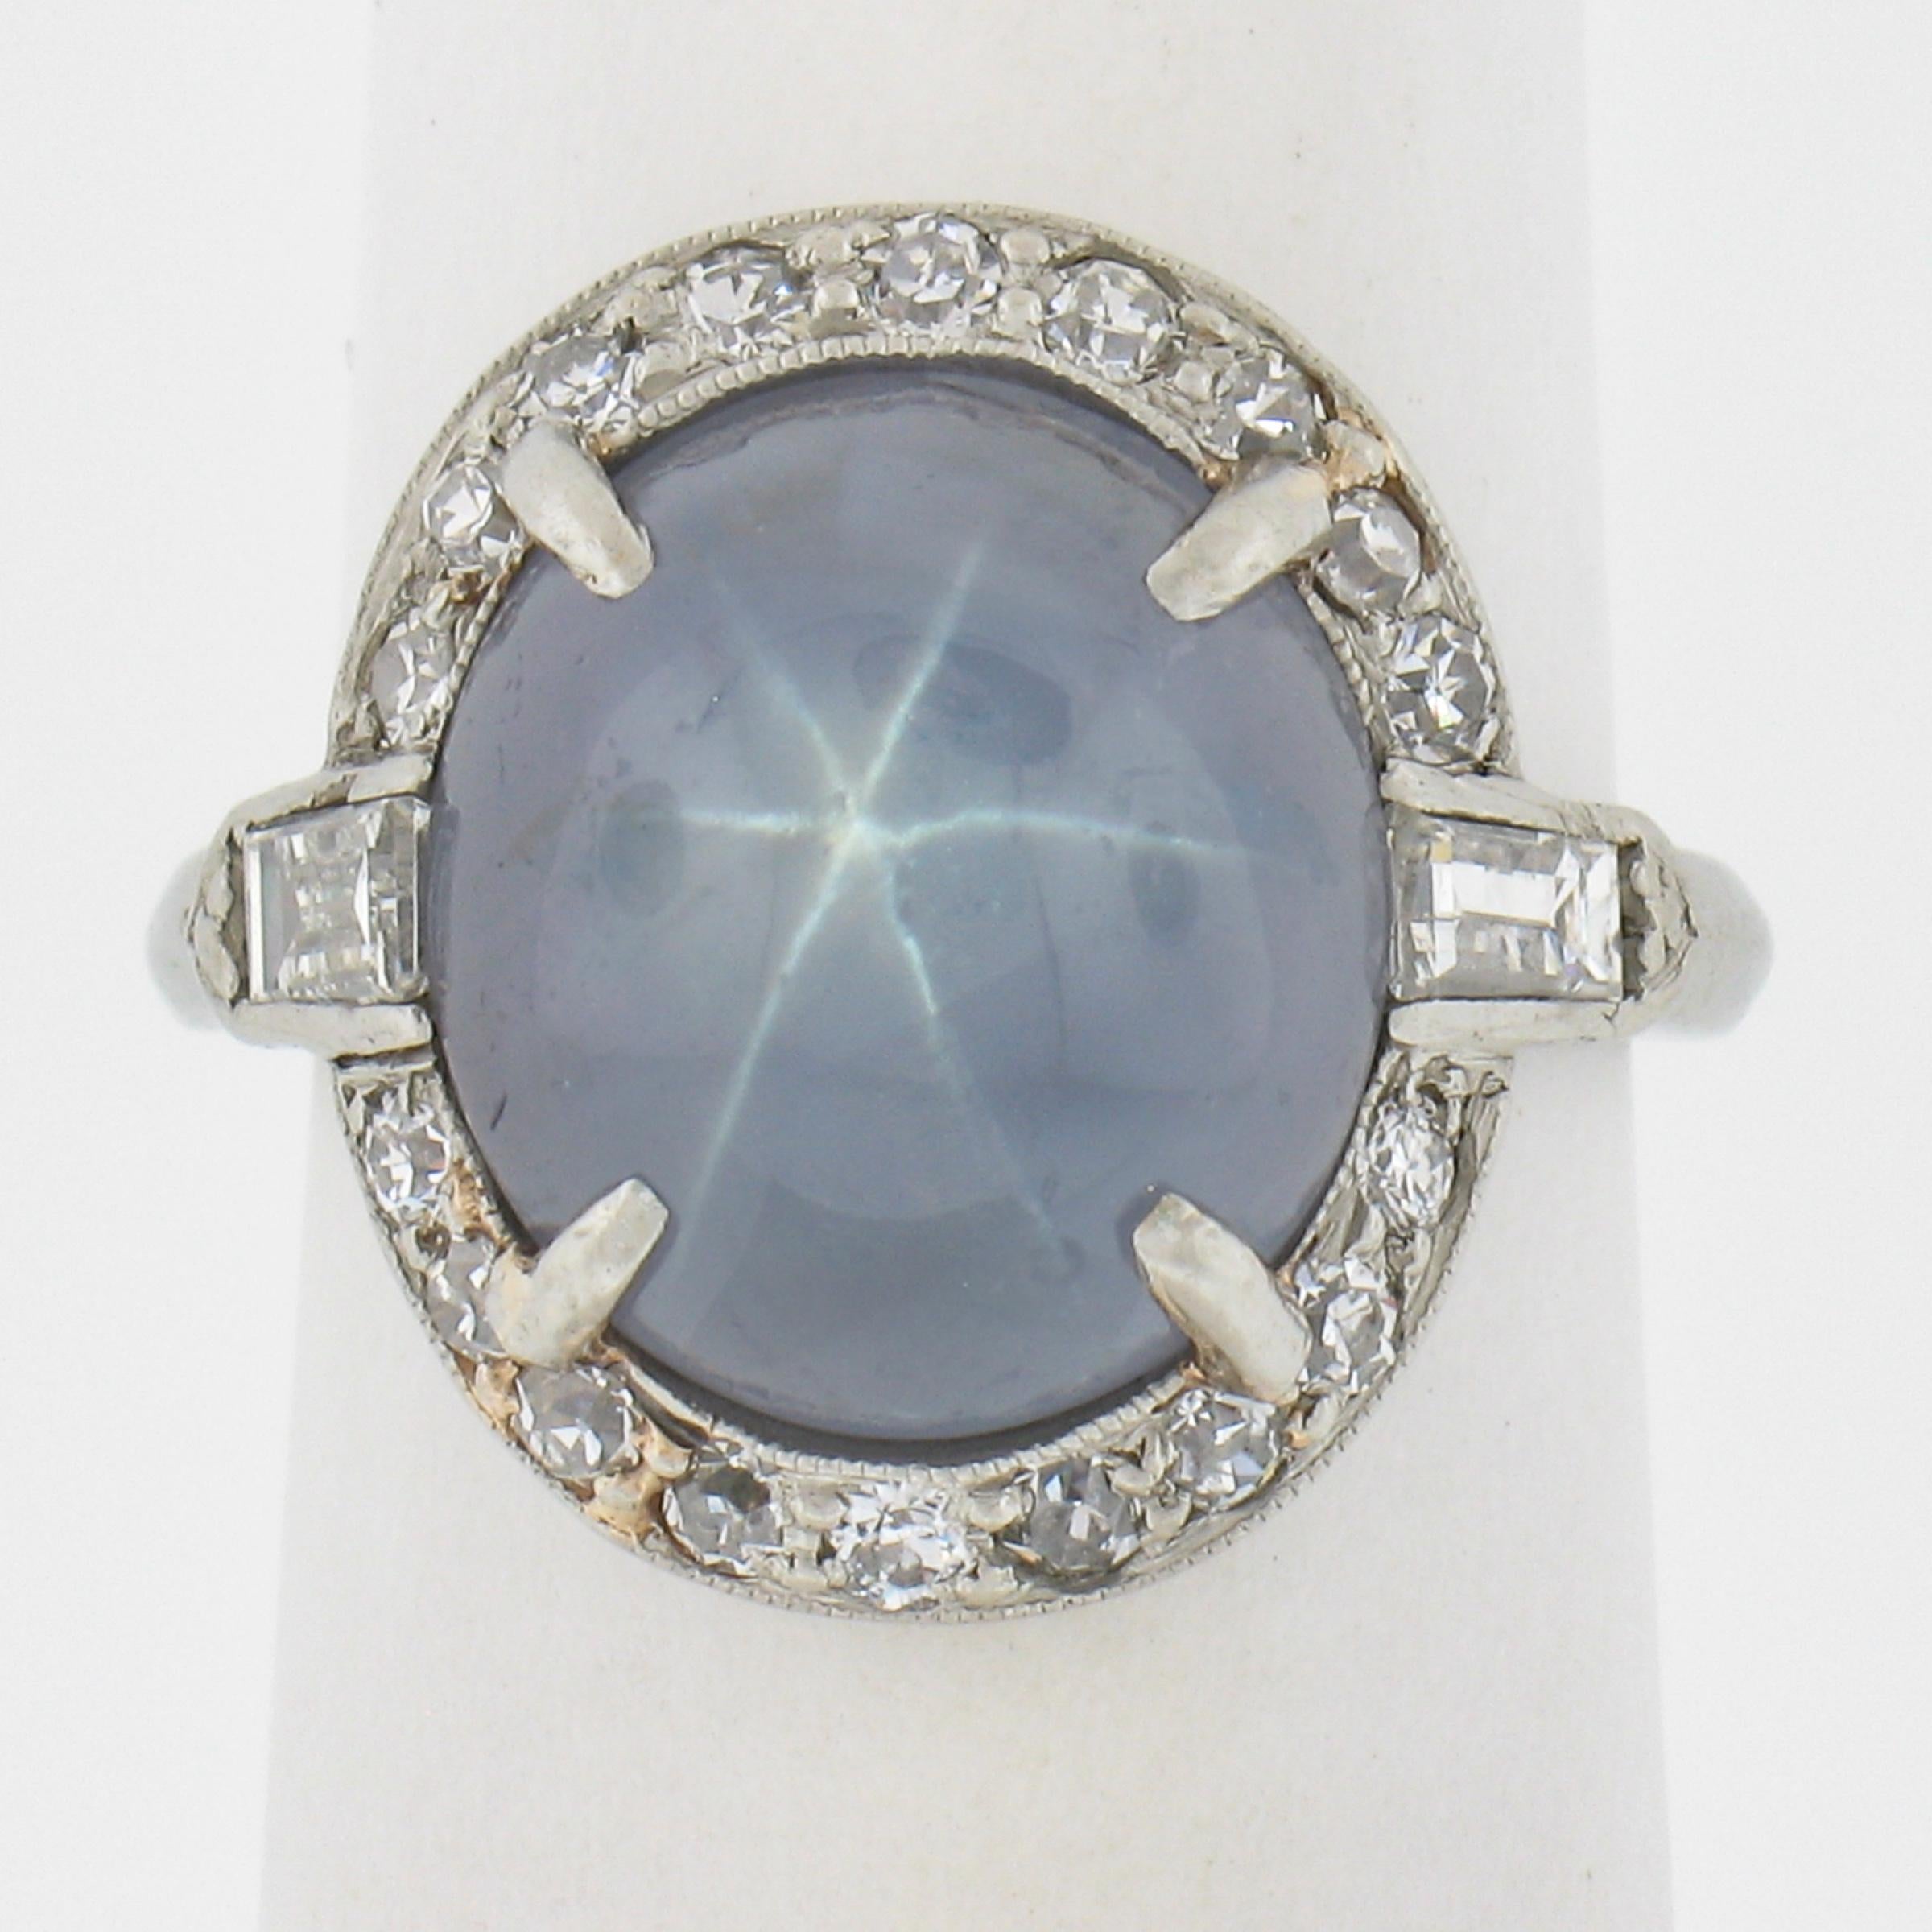 This gorgeous antique cocktail ring is crafted in solid platinum and features a gorgeous, GIA certified, natural star sapphire stone that displays a very clear and well centered star over its unique and desirable light blue color. The sapphire stone